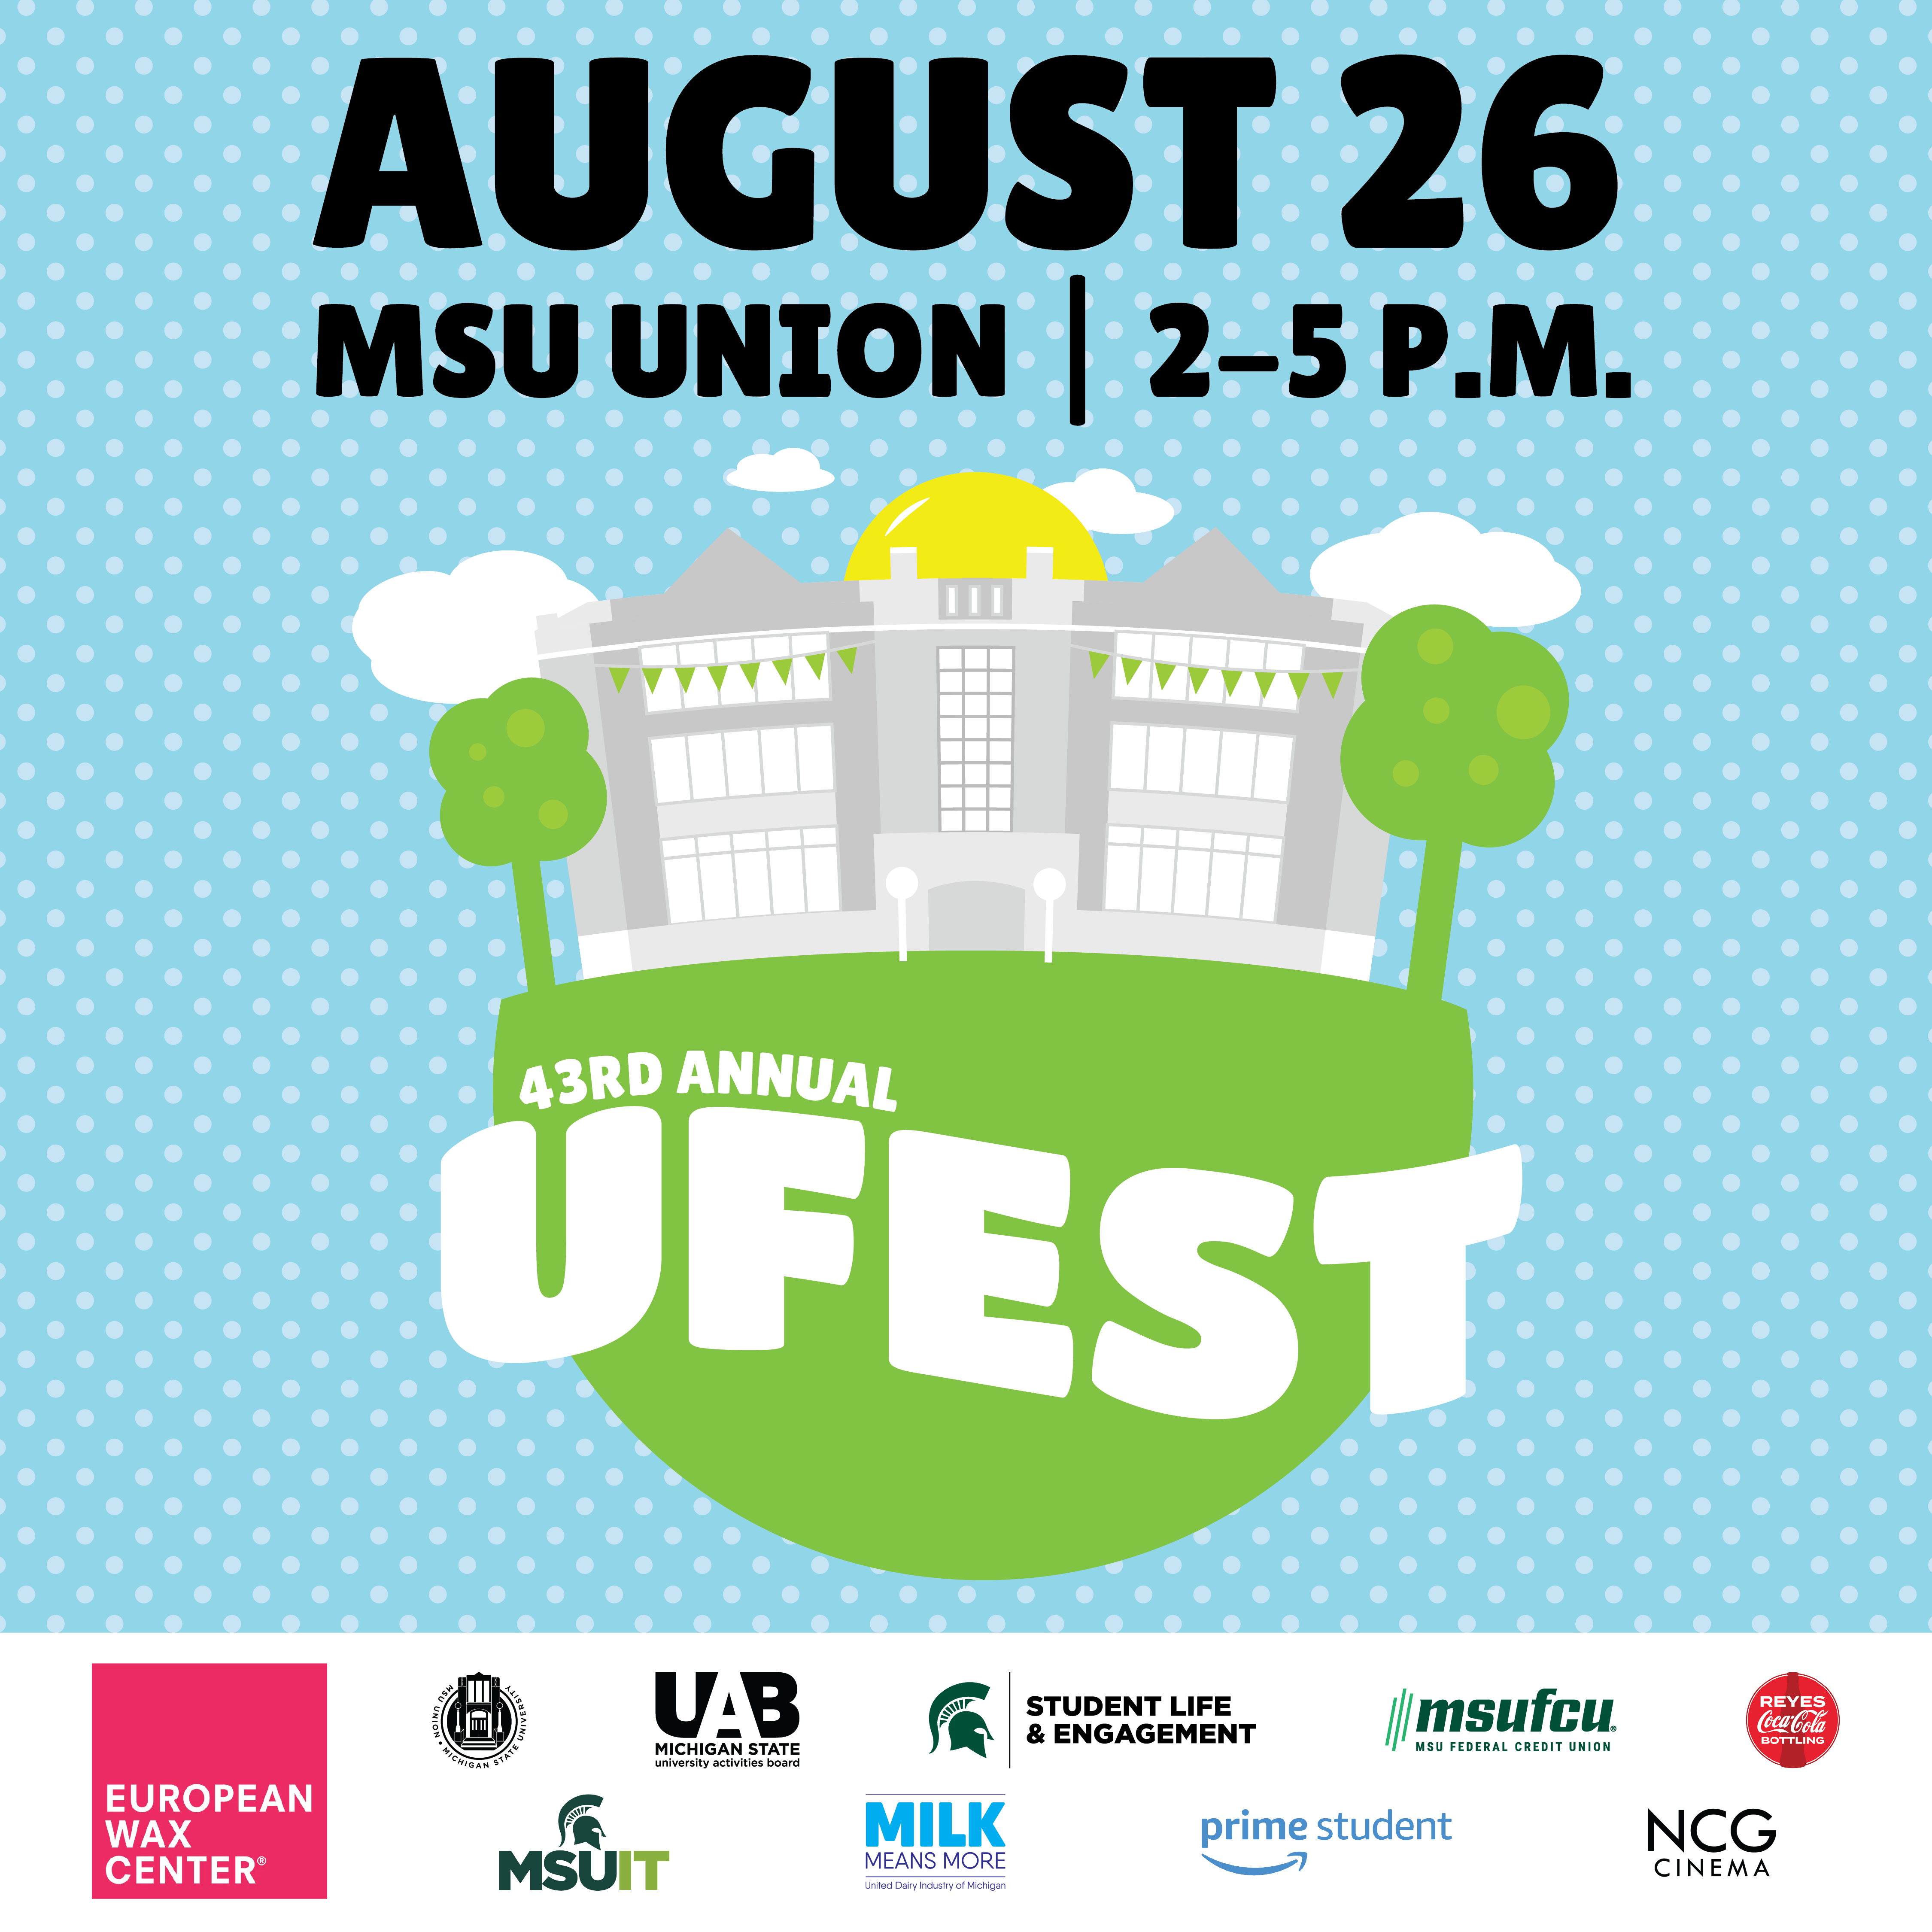 UFest event poster including drawing of MSU Union